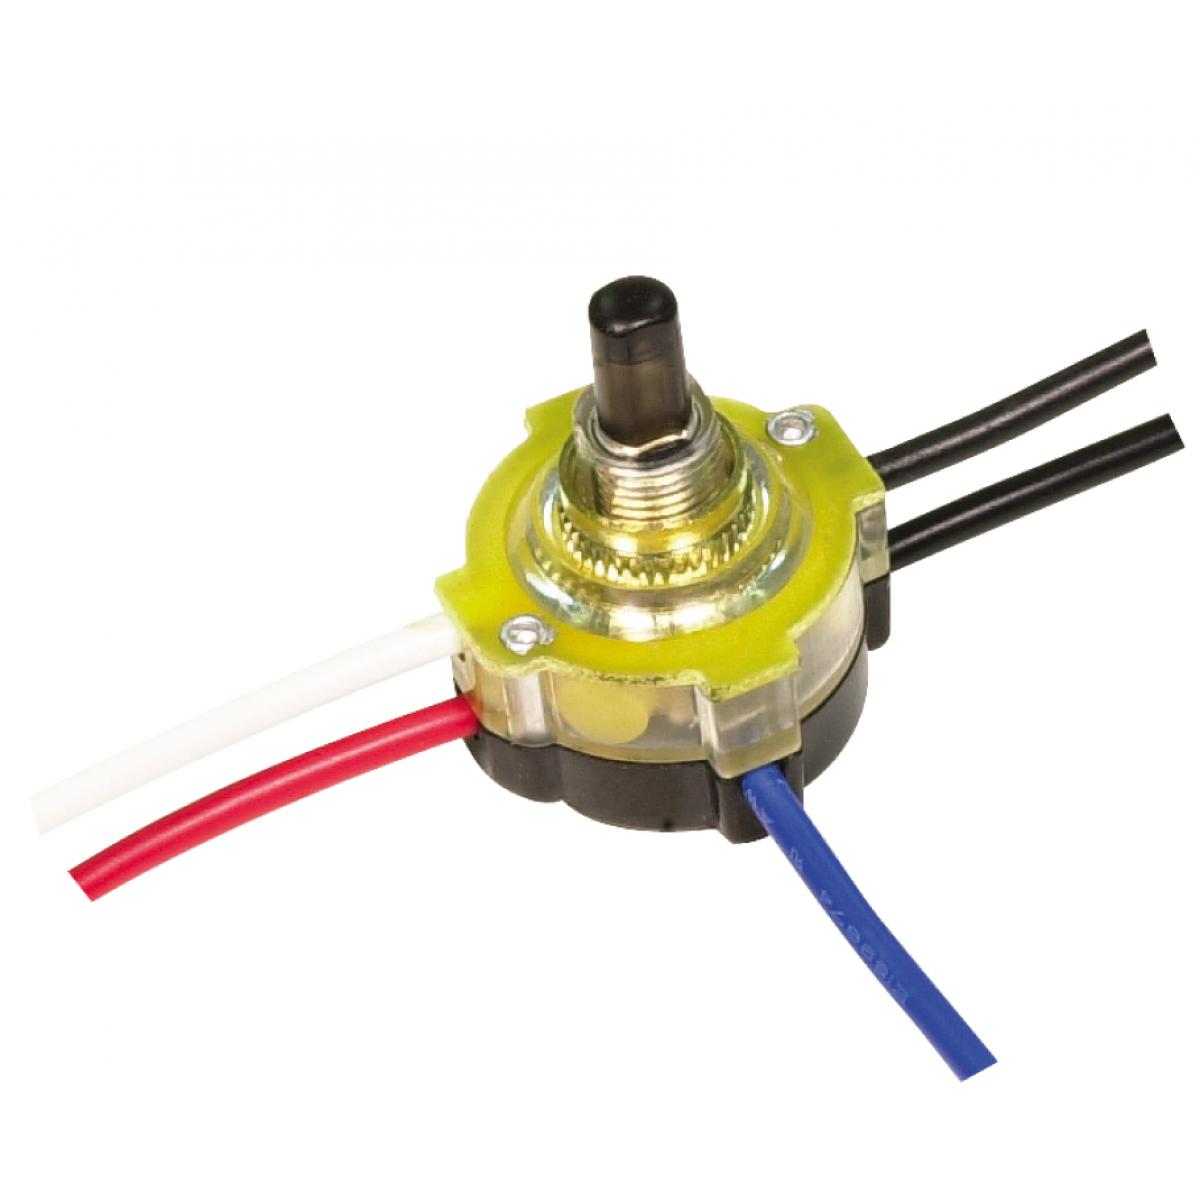 Satco 80-1357 3-Way Lighted Push Switch, Plastic Bushing, 2 Circuit, 4 Position(L-1, L-2, L1-2, Off). Rated: 6A-125V, 3A-250V